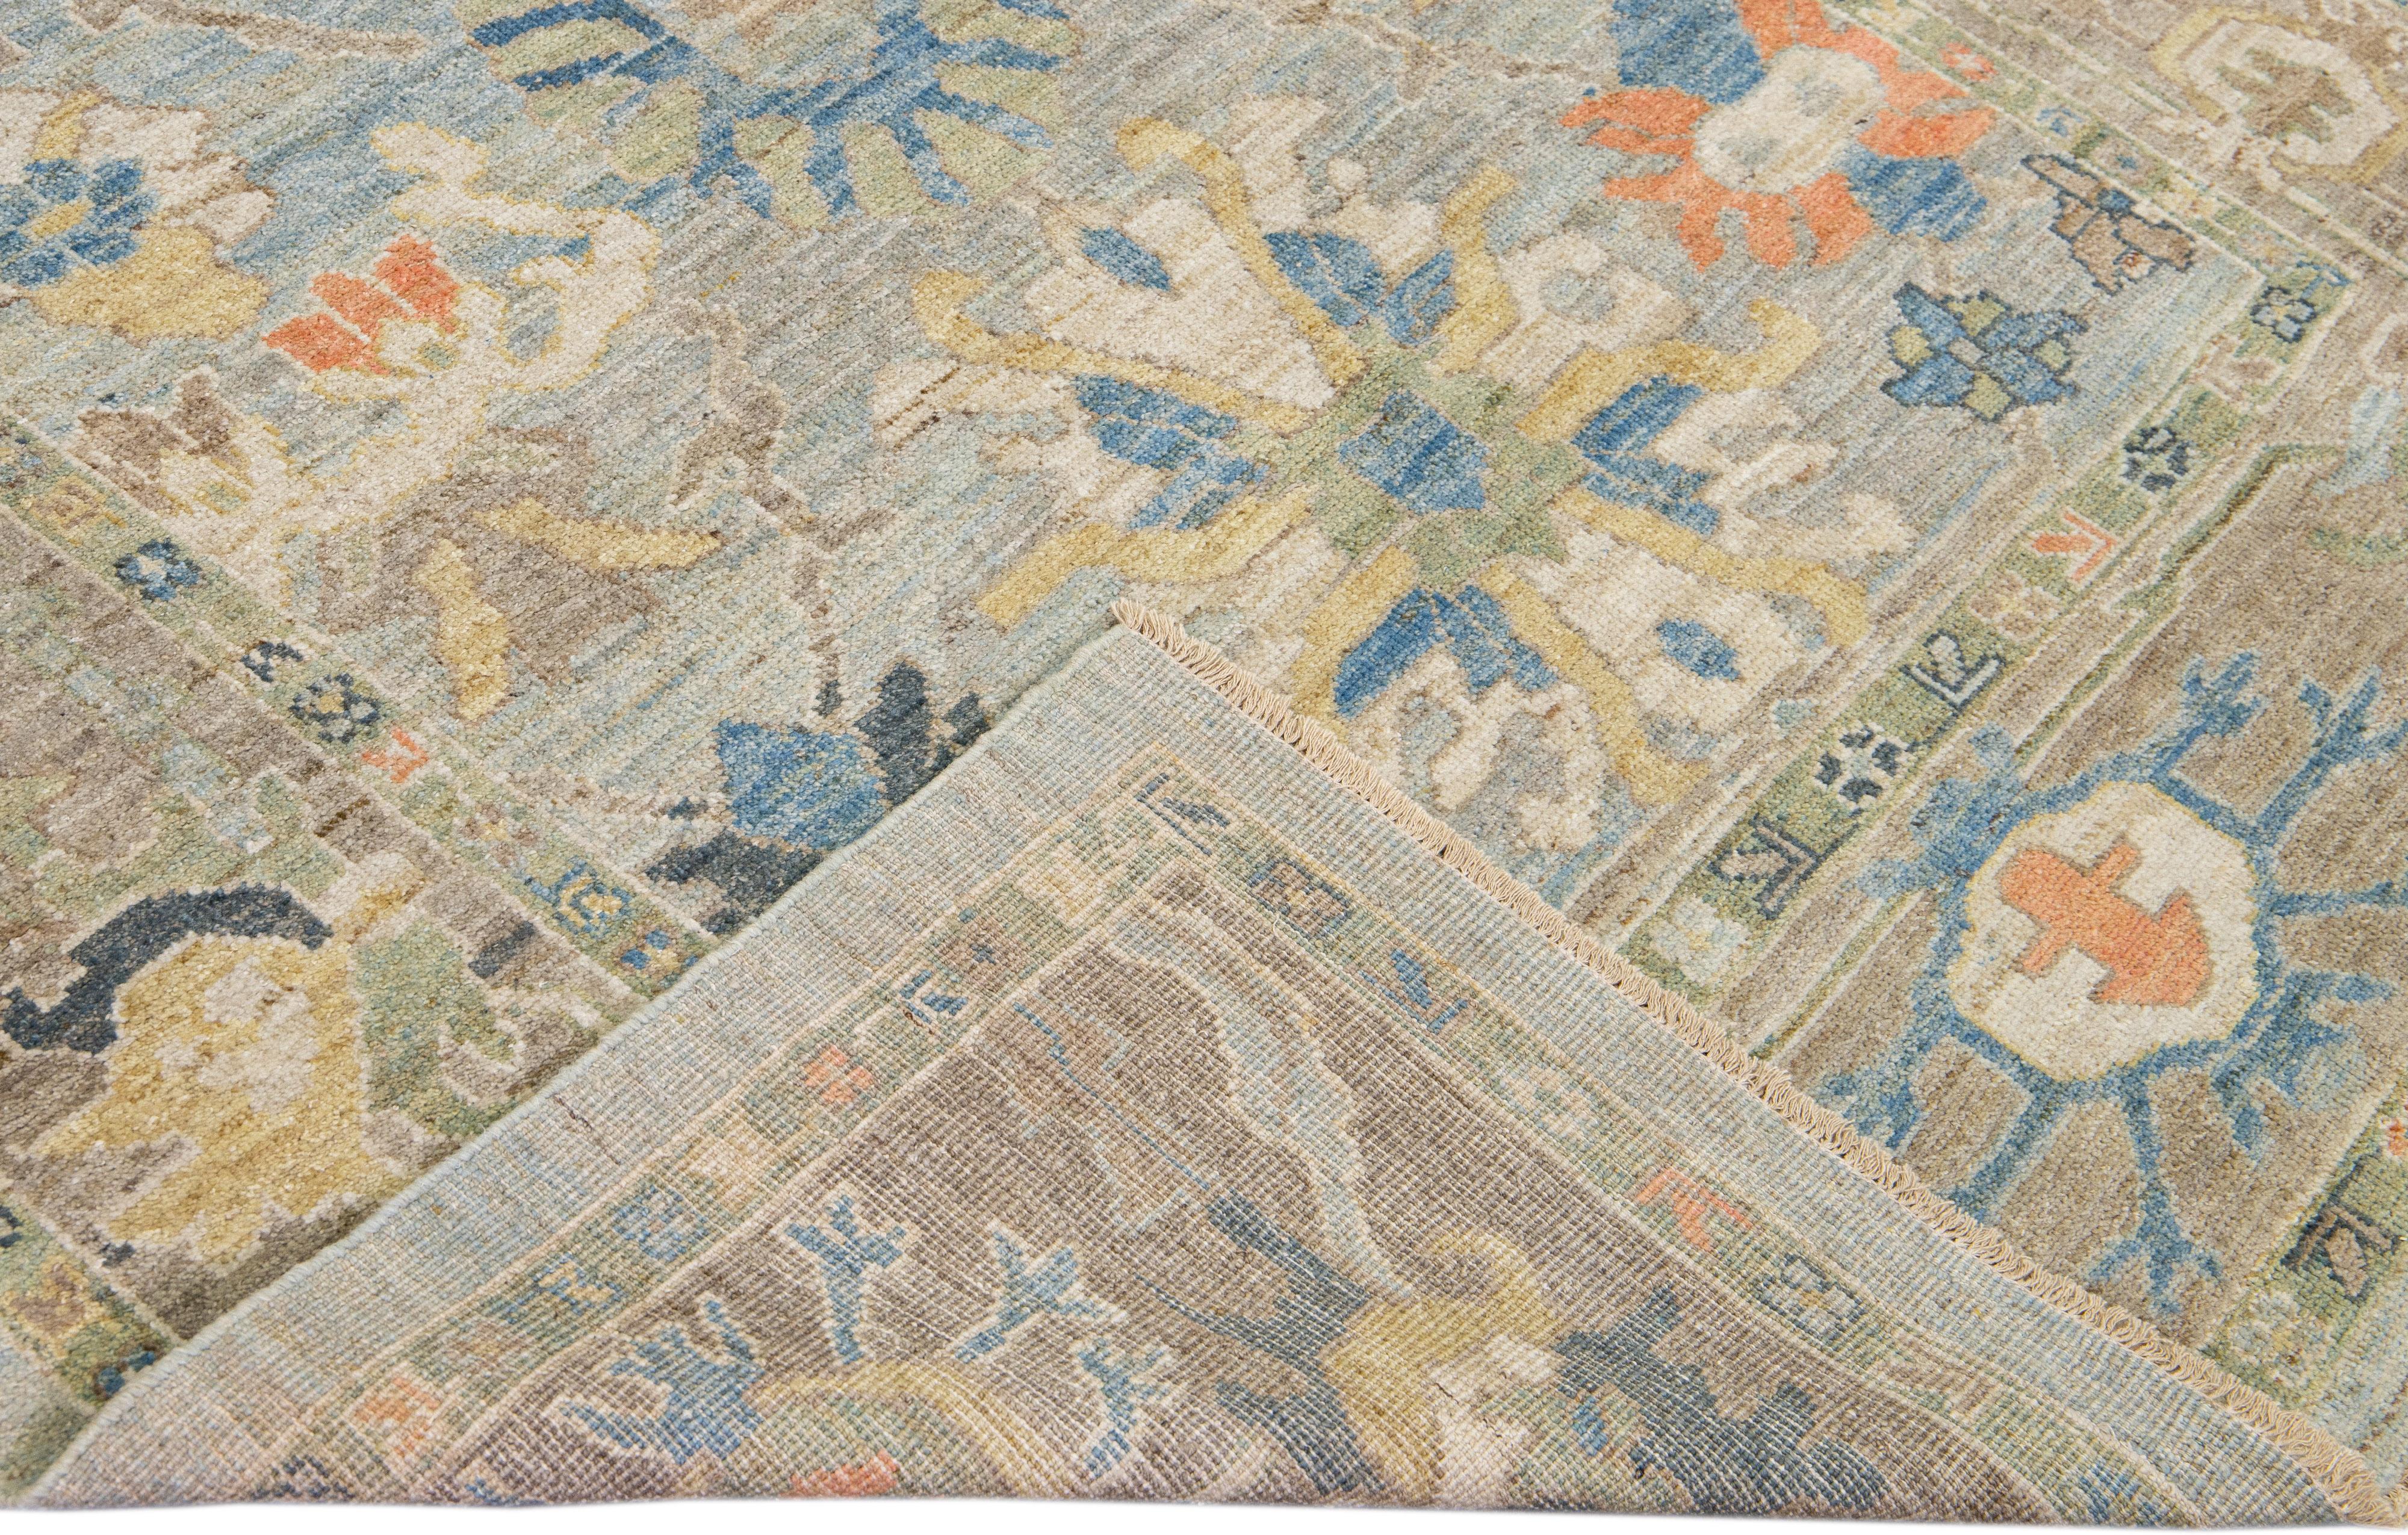 Beautiful modern Mahal hand-knotted wool runner with a blue field. This Piece has yellow, brown, and orange accents in a gorgeous all-over Classic floral design.

This rug measures: 6' x 18'2